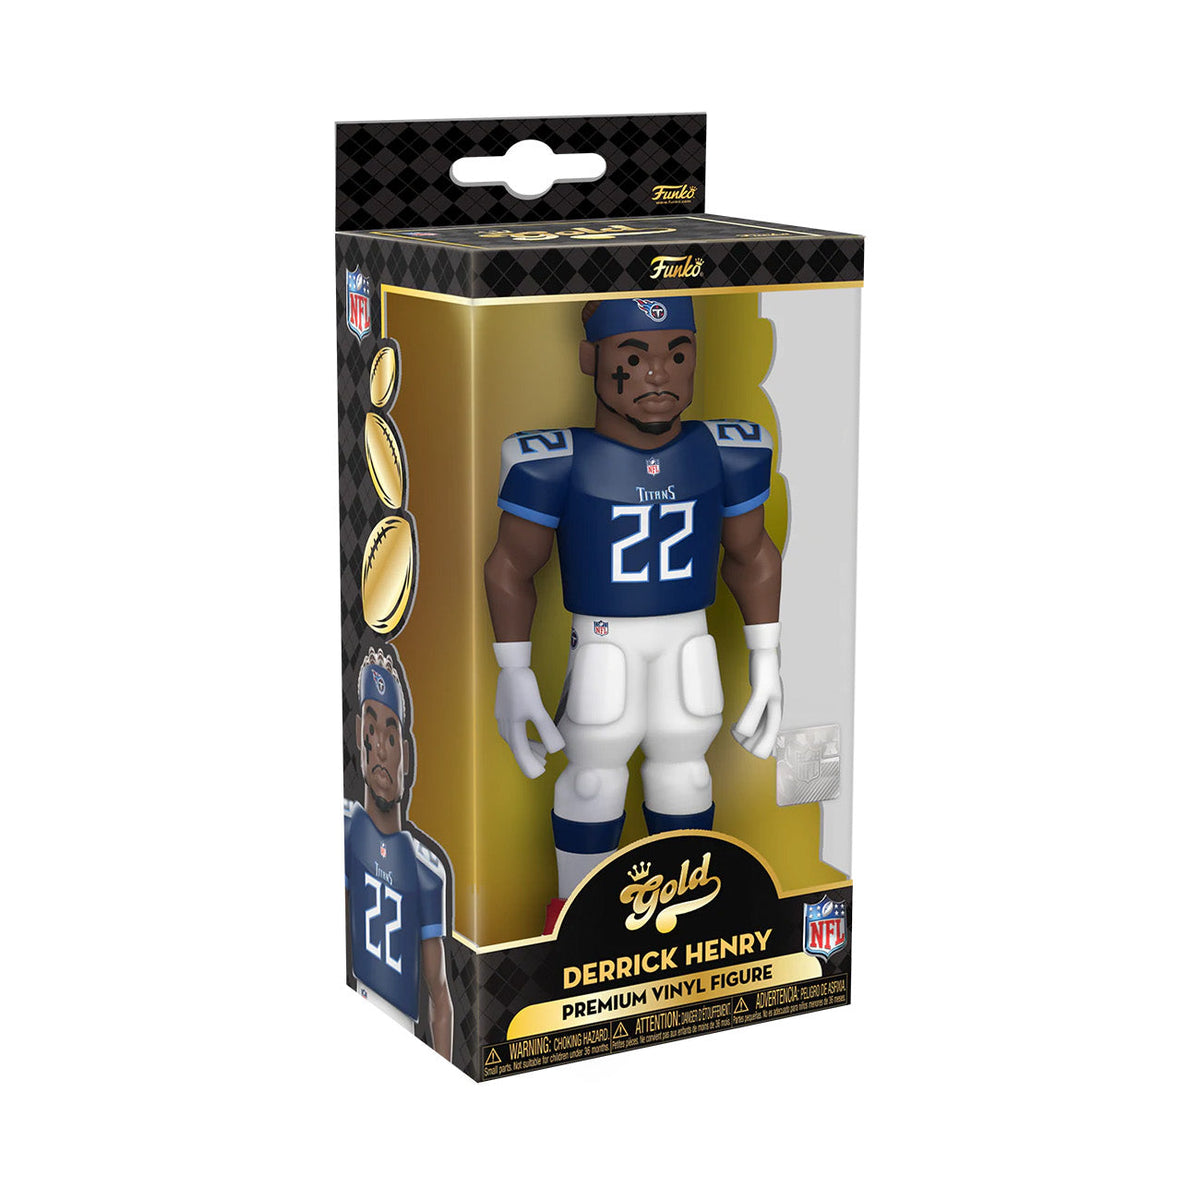 derrick-henry-16-chance-at-a-chase-tennessee-titans-funko-vinyl-gold-5-inch-pre-order-for-estimated-q1-2022-delivery-vinyl-gold-5-inch-funko-775691_1200x.jpg?v=1644428663